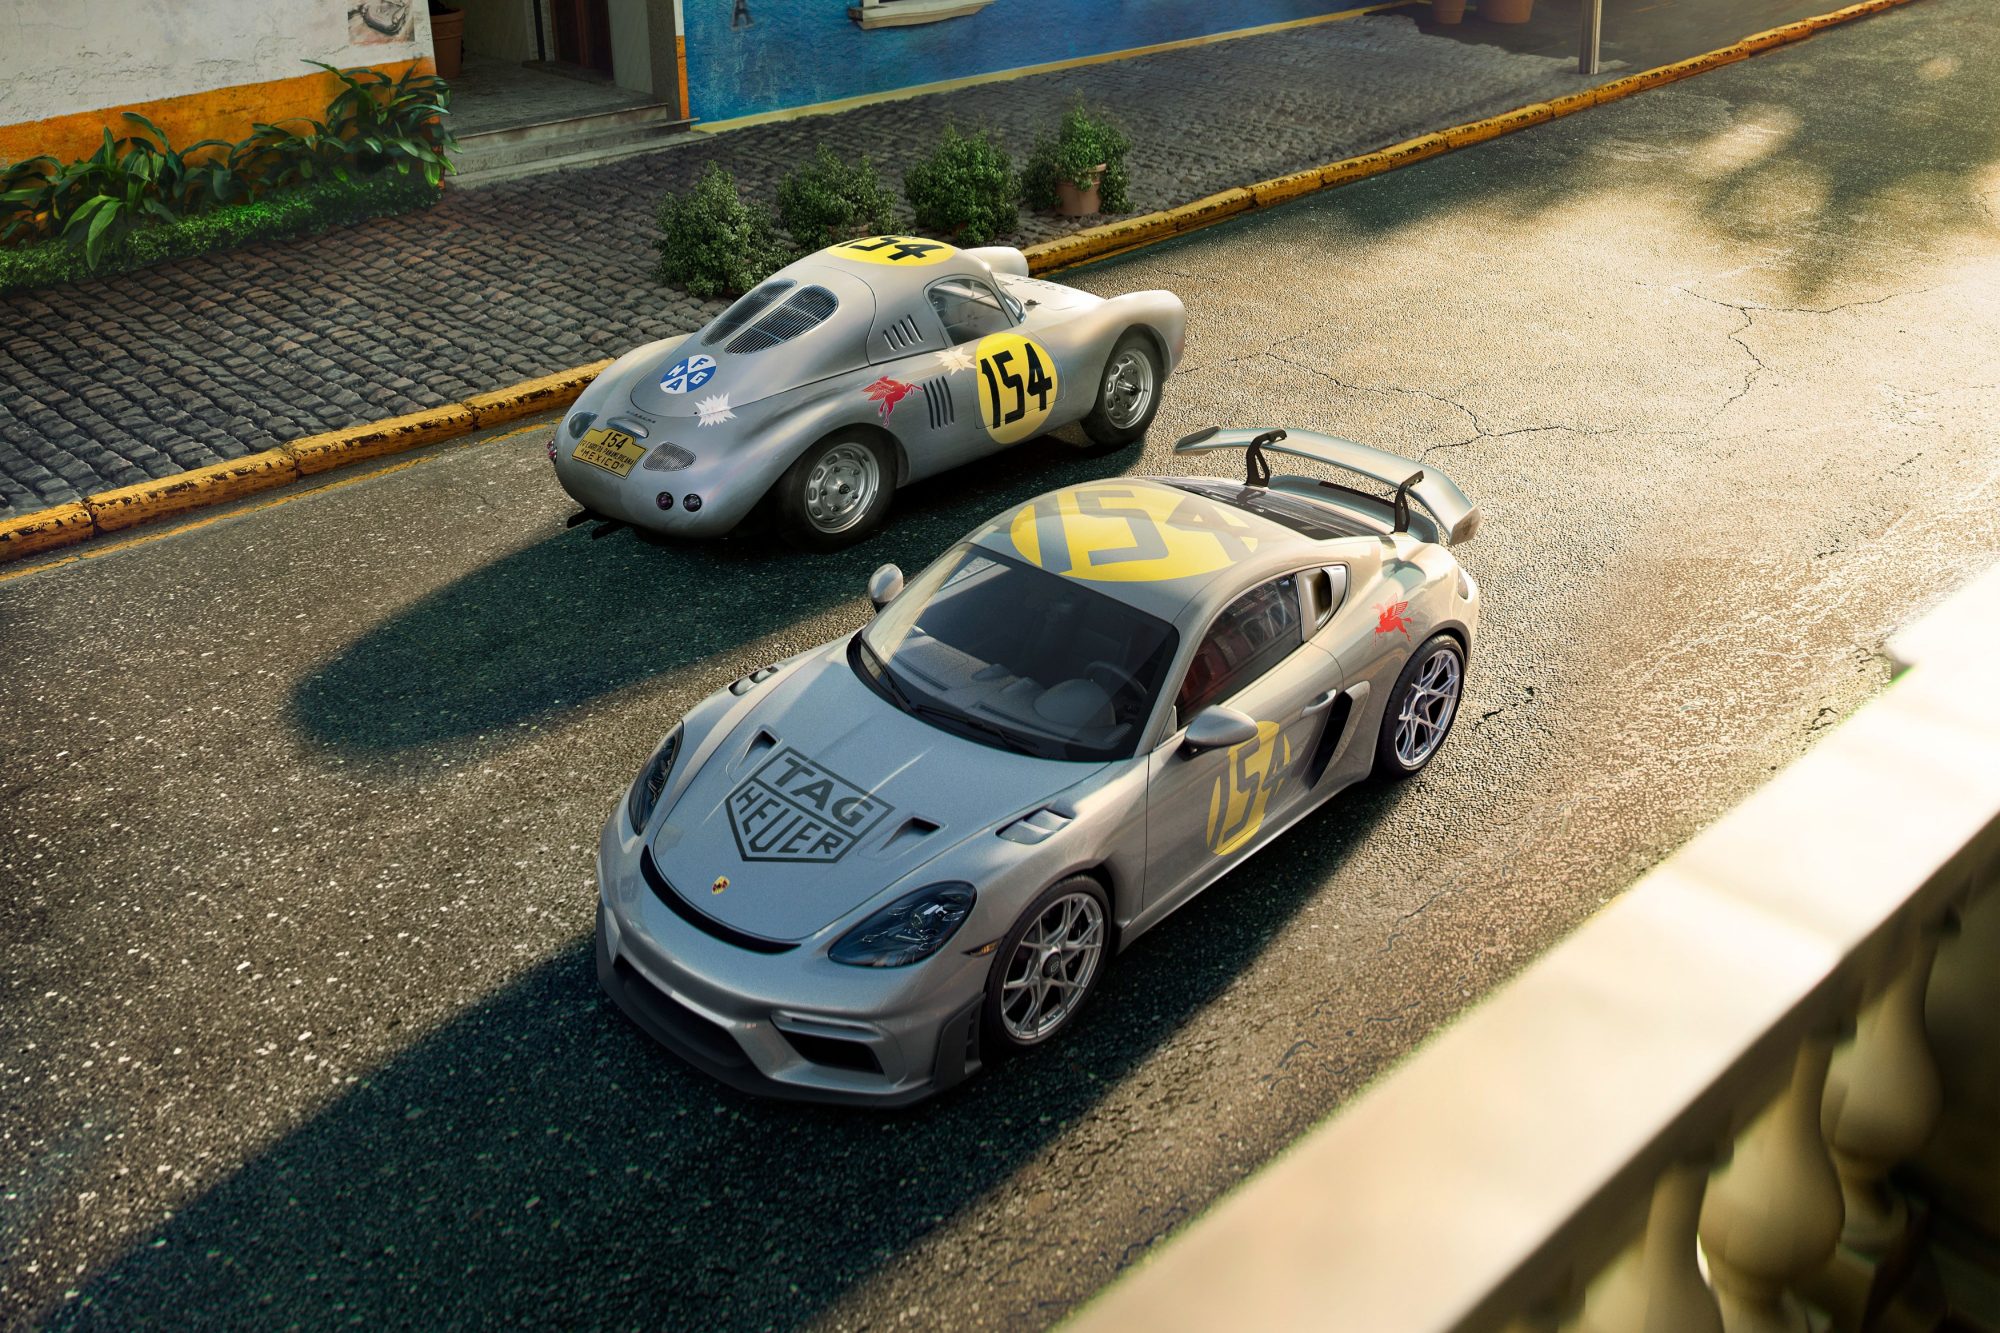 Porsche and TAG Heuer: An Homage to the Legendary Carrera Panamericana